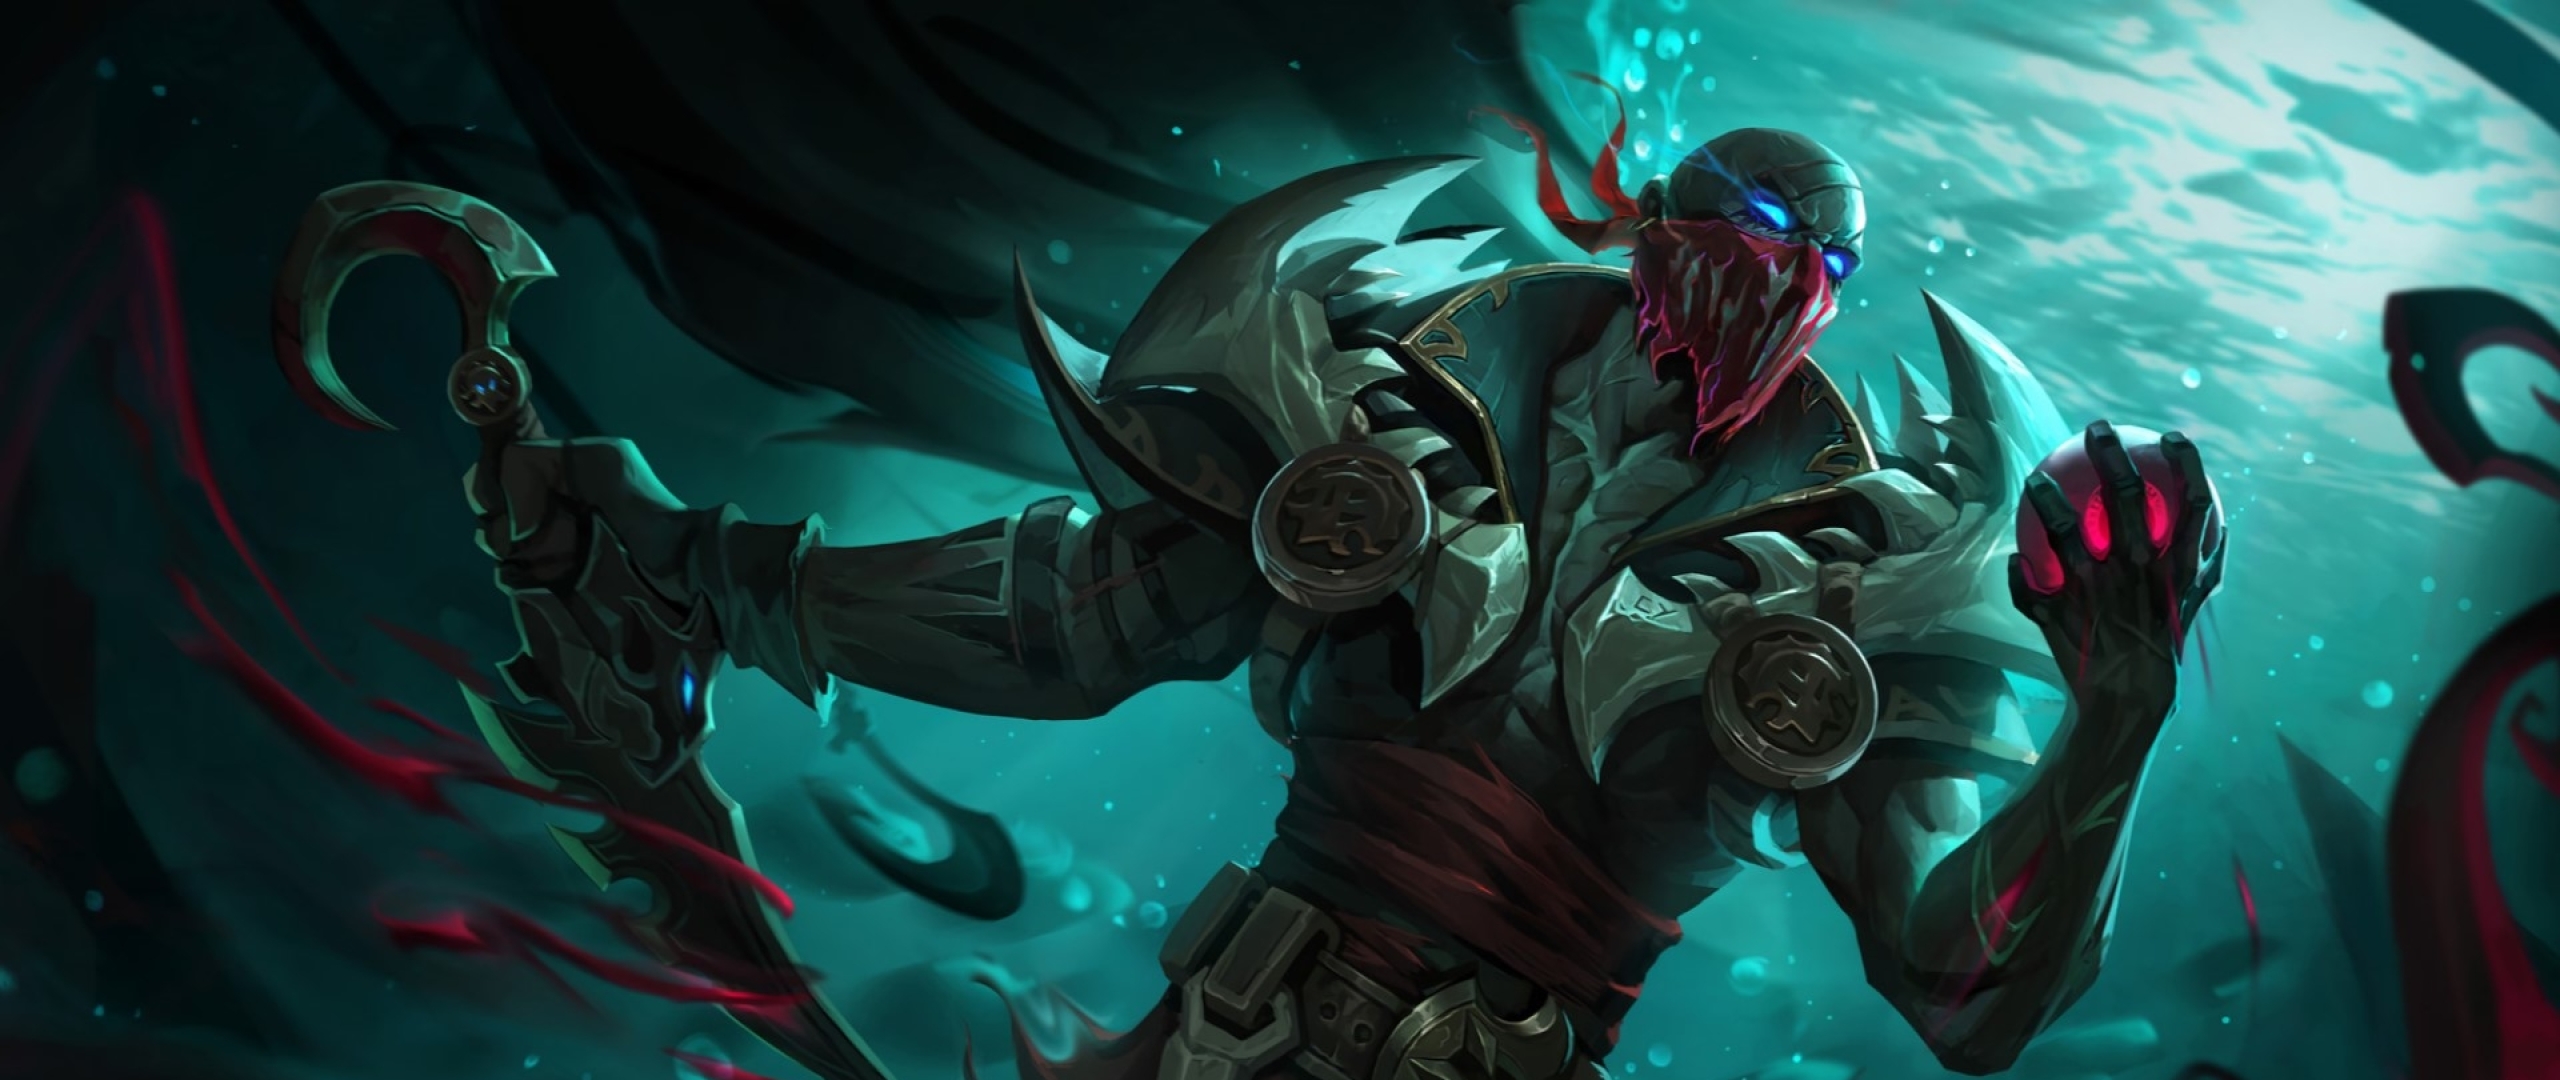 2560x1080 Pyke League Of Legends 2560x1080 Resolution Wallpaper Hd Games 4k Wallpapers Images Photos And Background